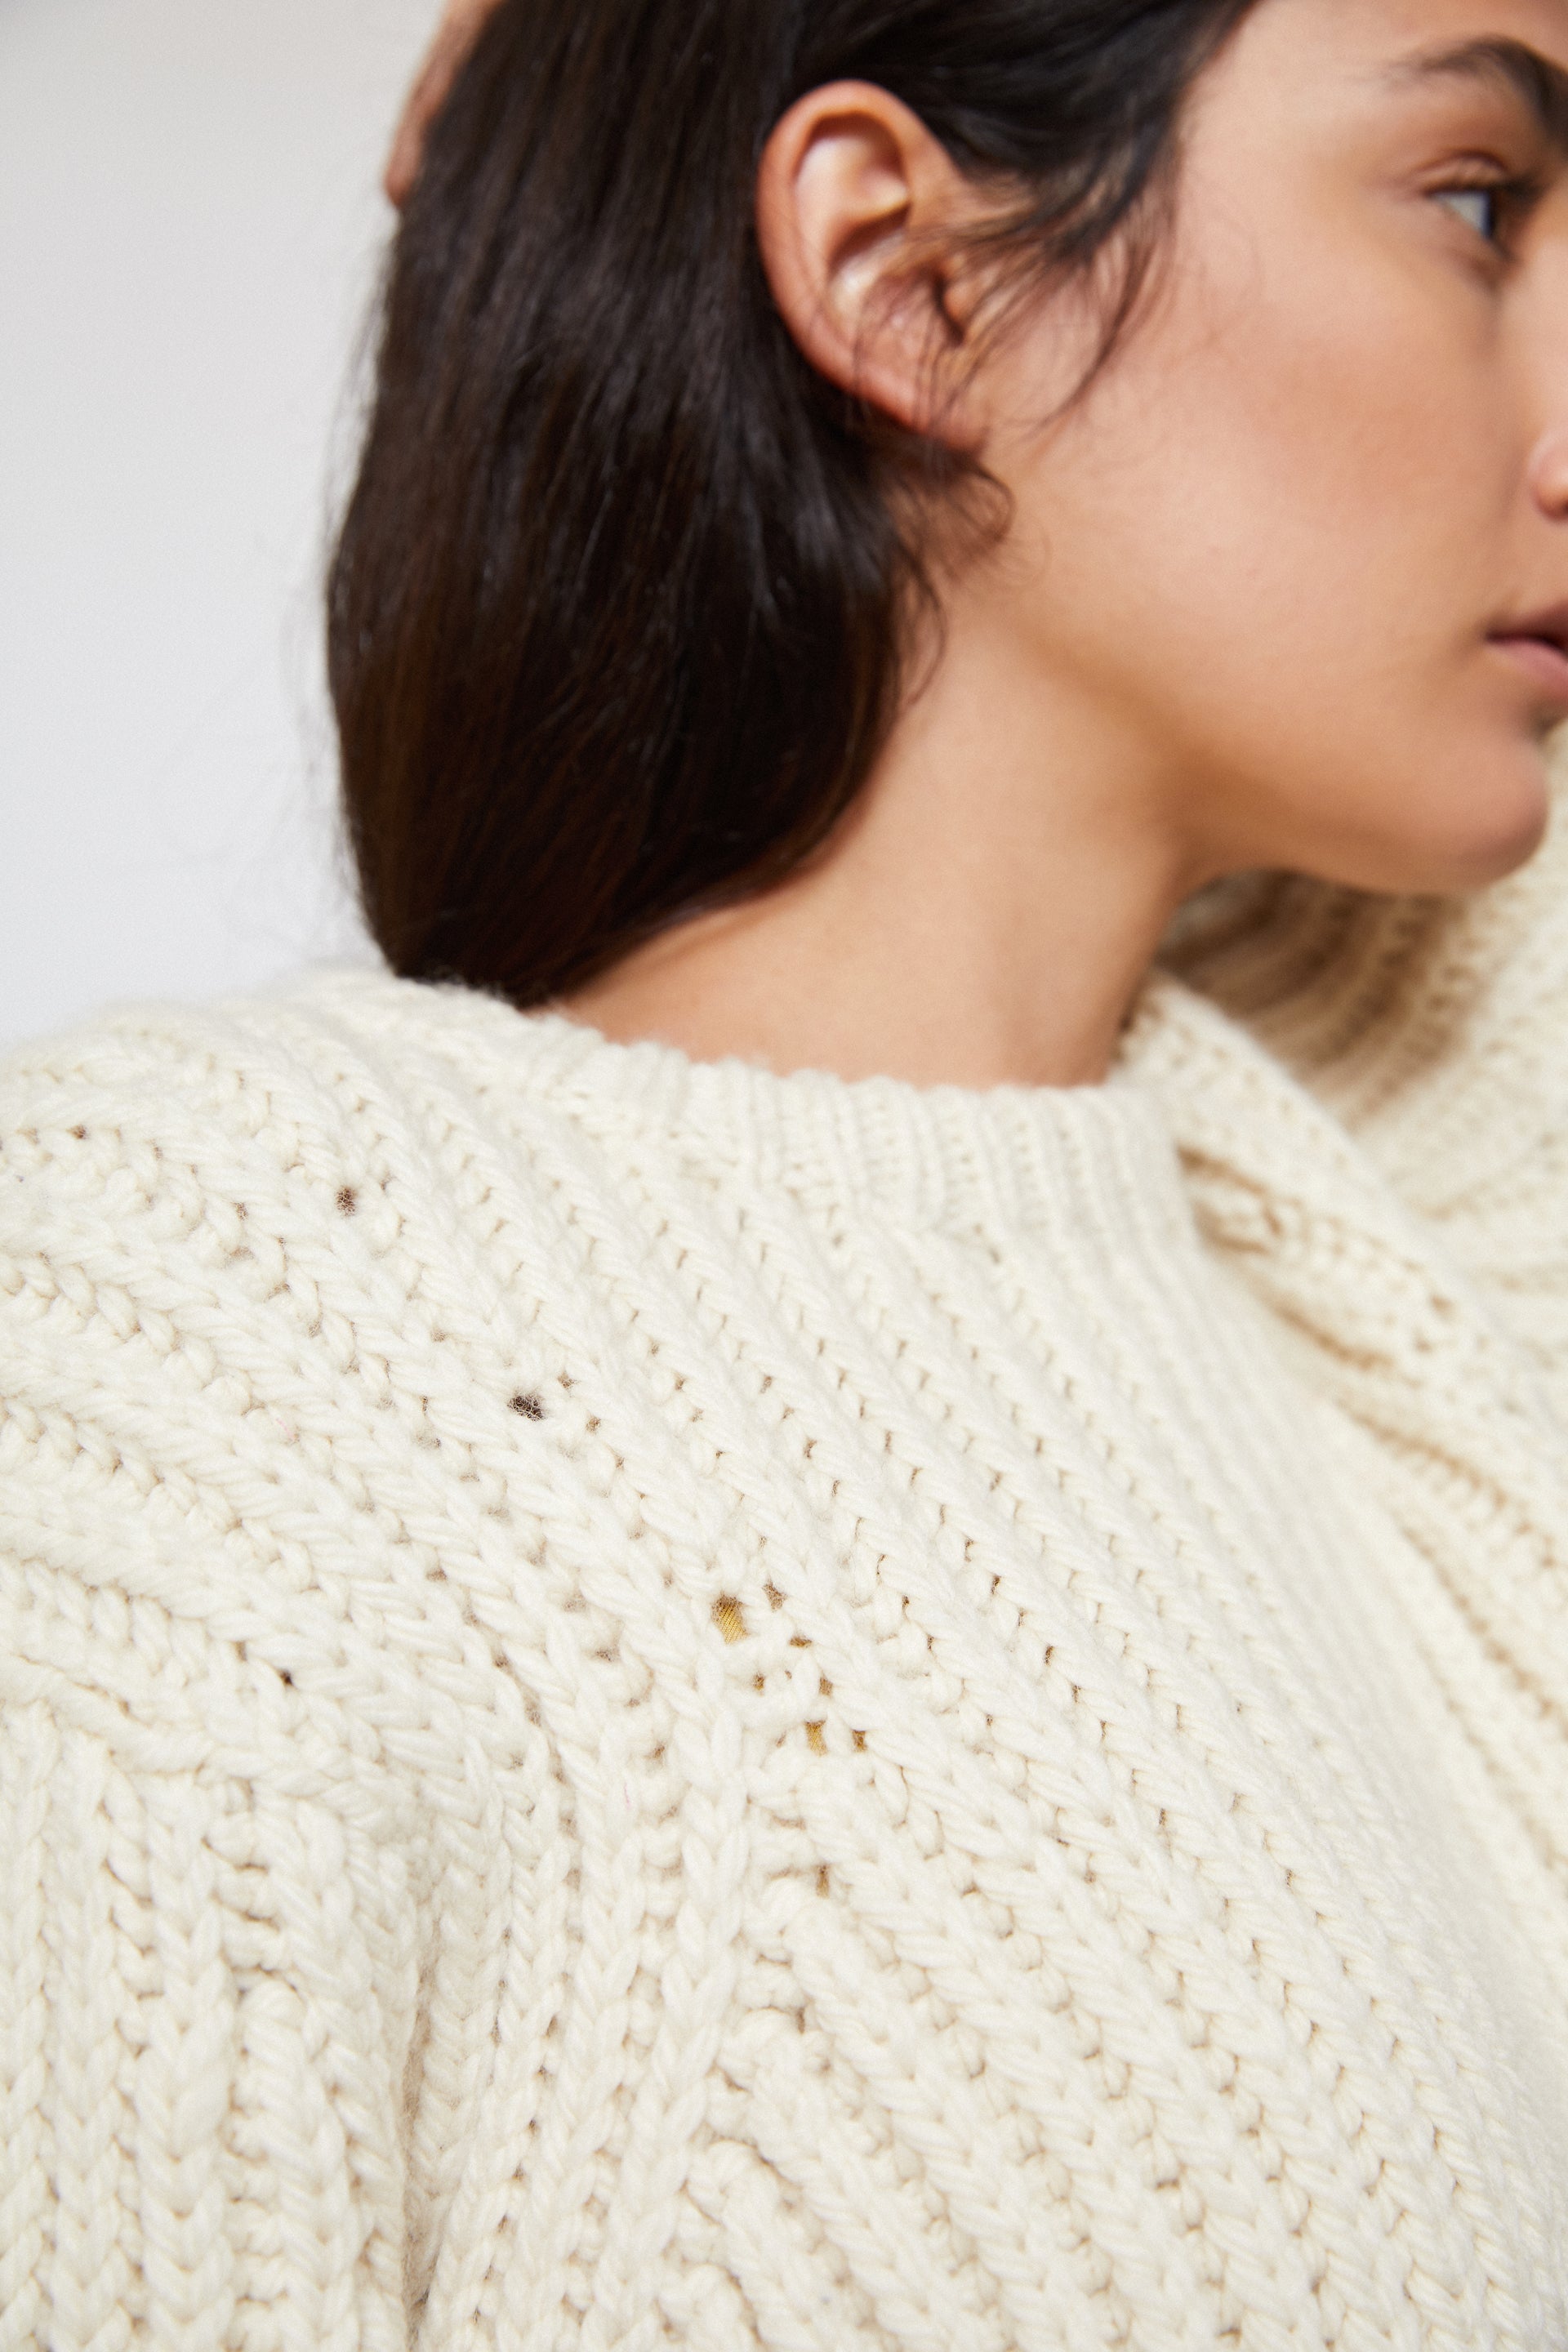 UNDYED, WOOL, HAND-KNITTED, JUMPER, SWEATER, FISHERMAN RIBB, STYLISH, SUSTAINABLE, HAND-CRAFTED, WOMENSWEAR 